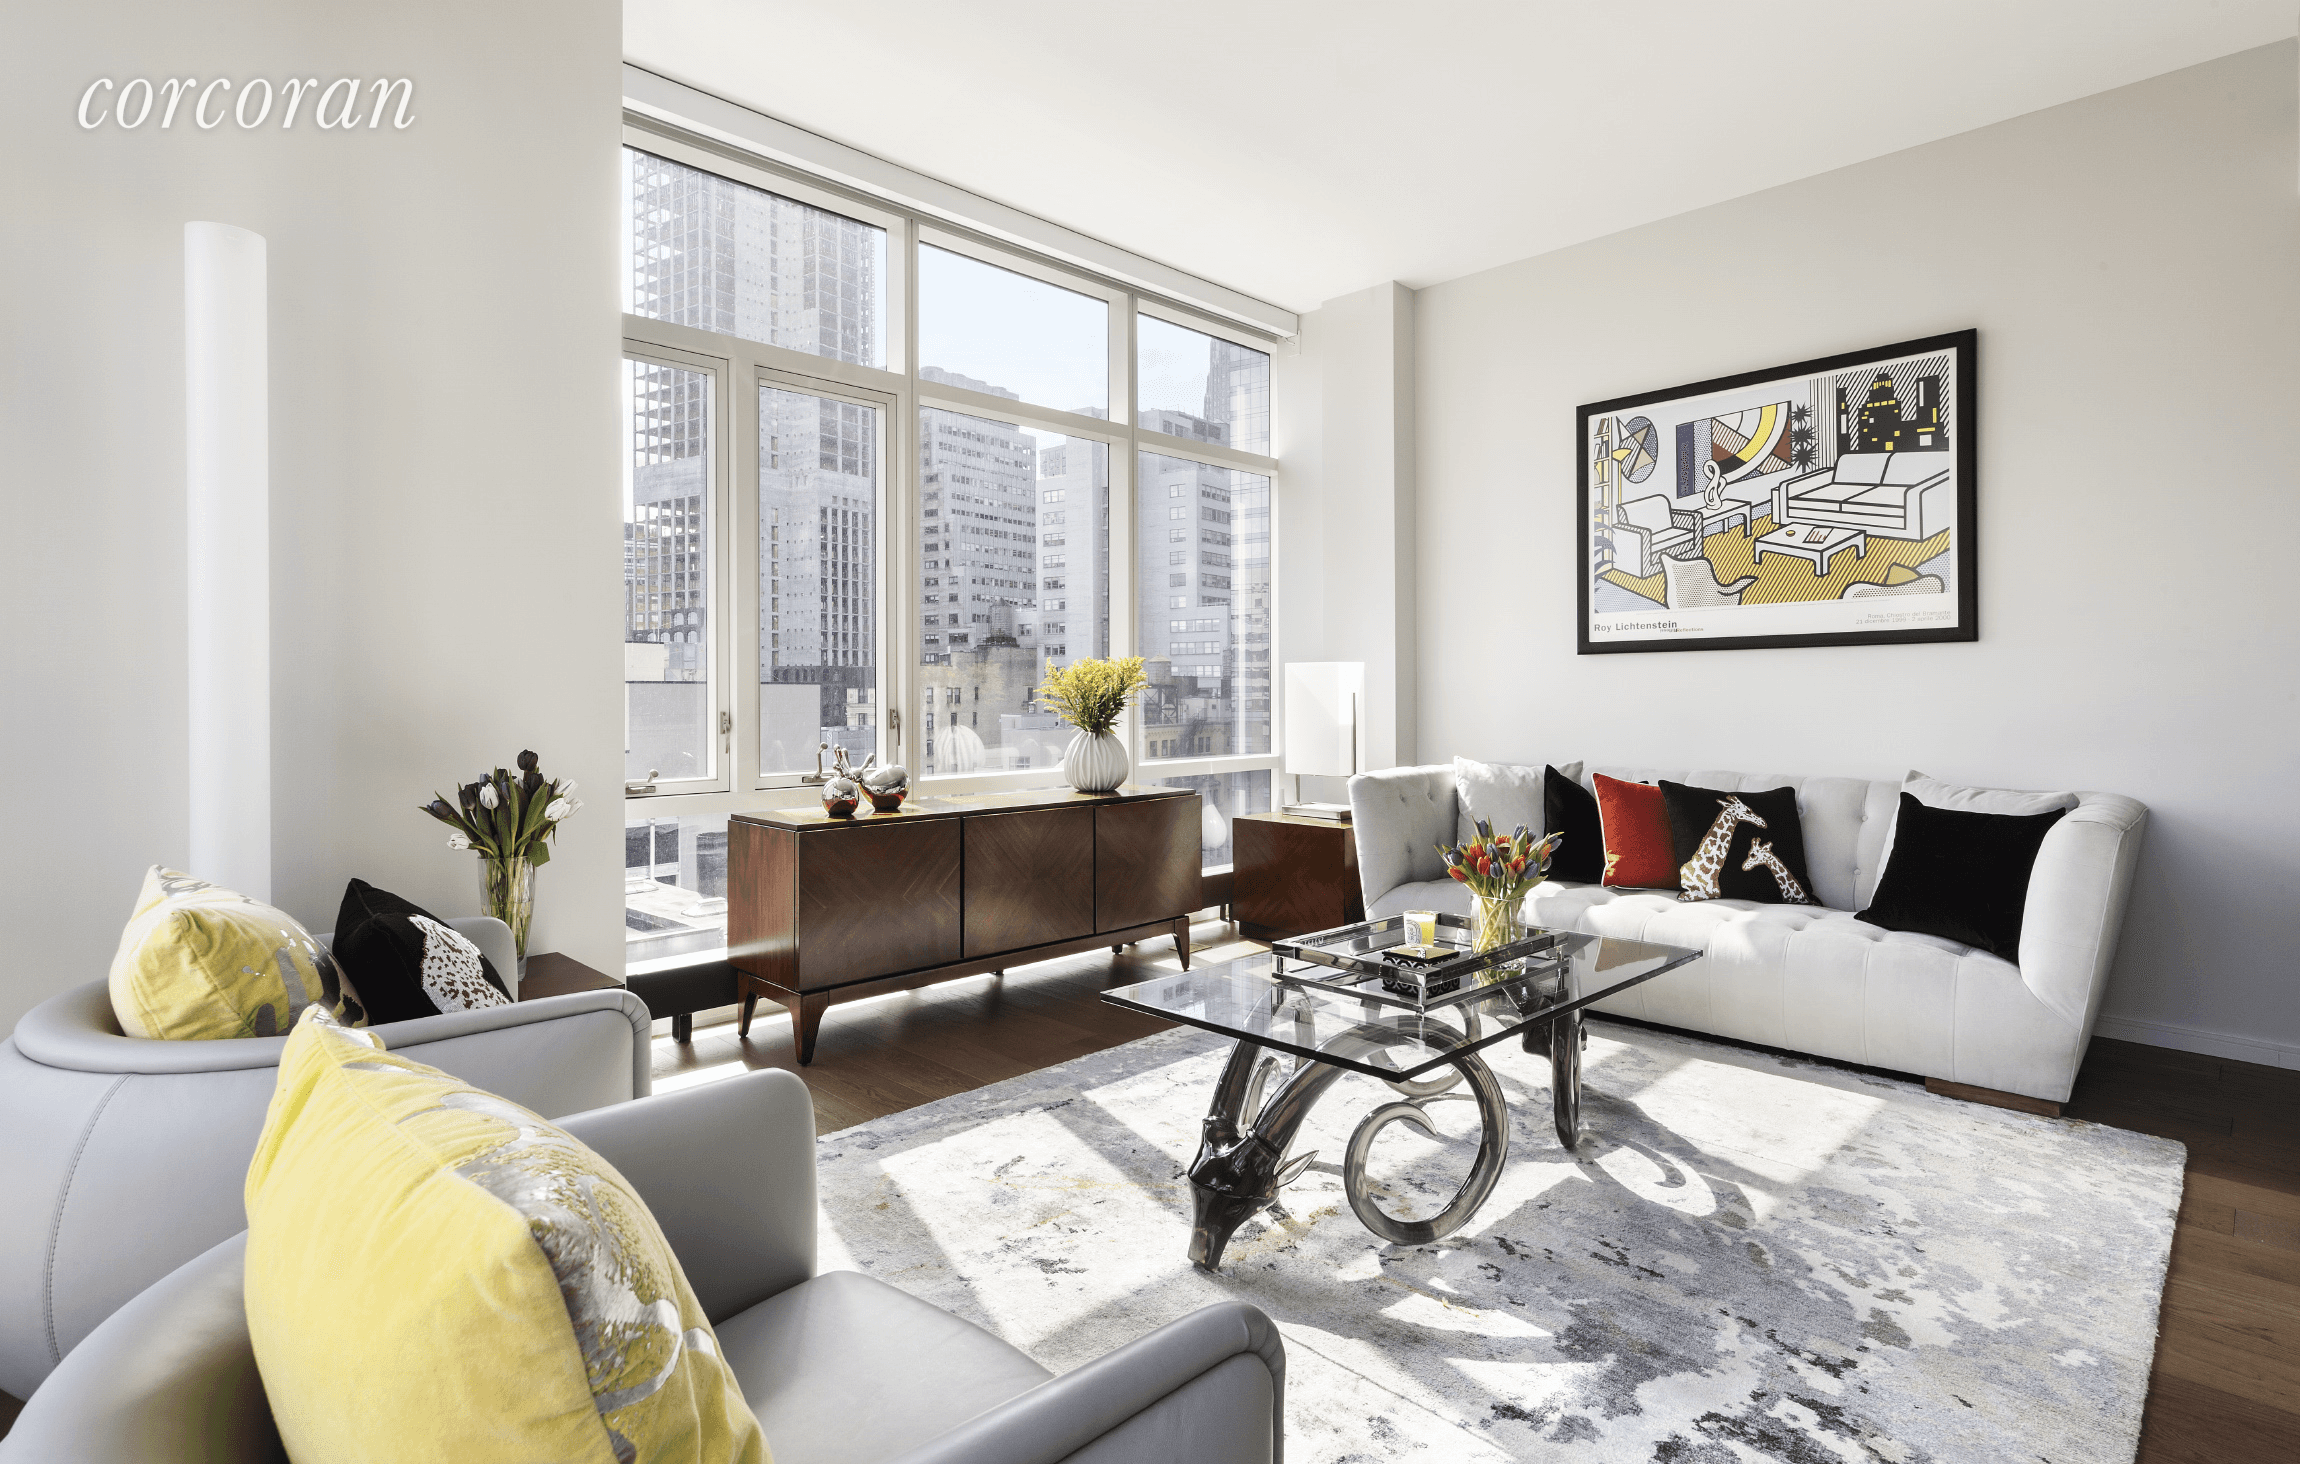 Make your home among the city's most breathtaking architectural gems in this stunning high floor, one bedroom, one bathroom condominium at the esteemed Beekman Residences.